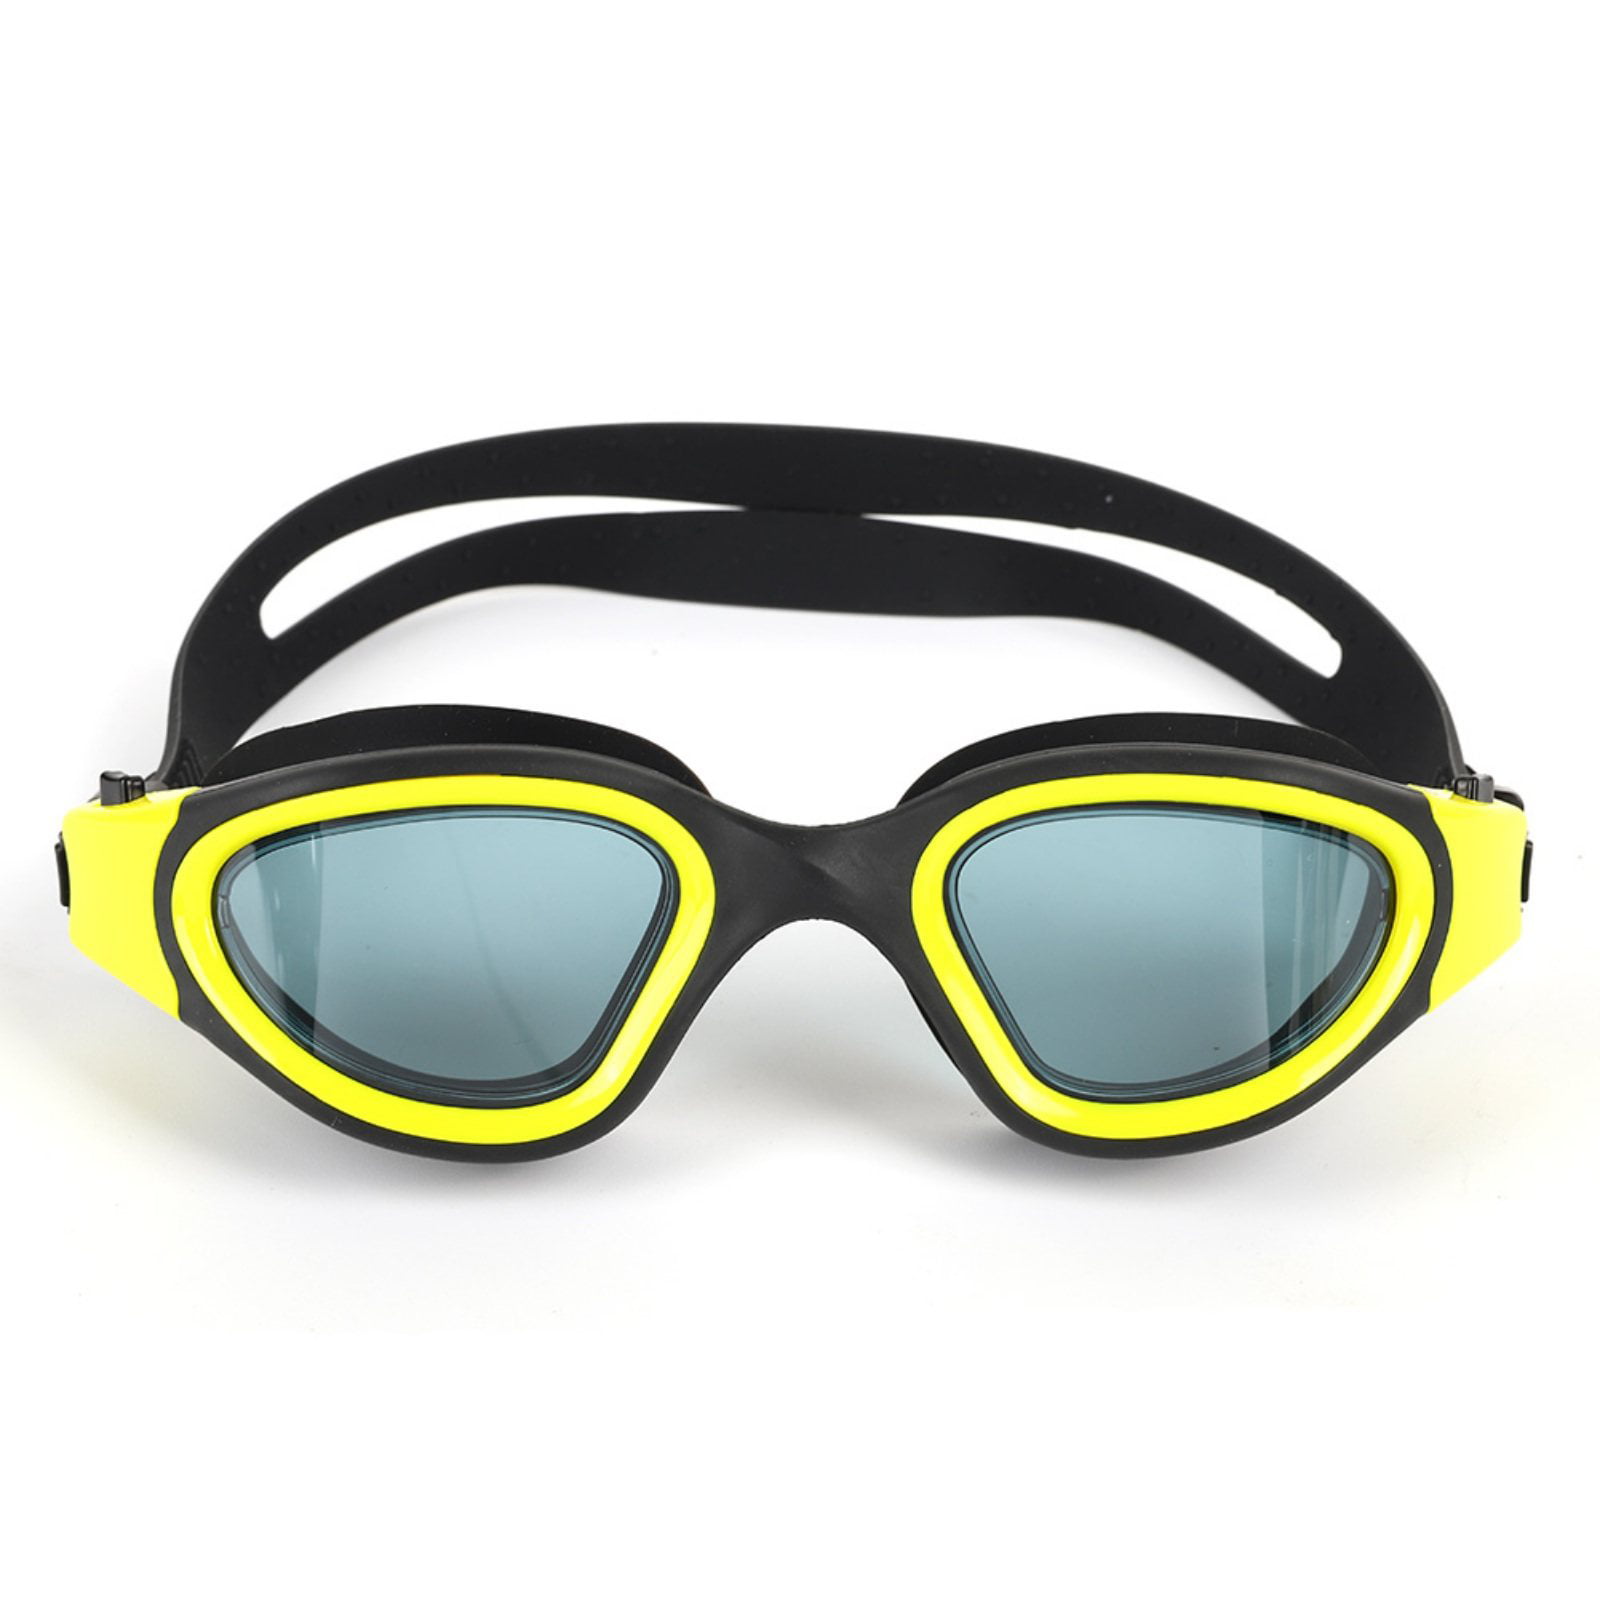 Silicone Anti Fog UV Protection Swimming Goggles for Men Women Adult Gents Lady 